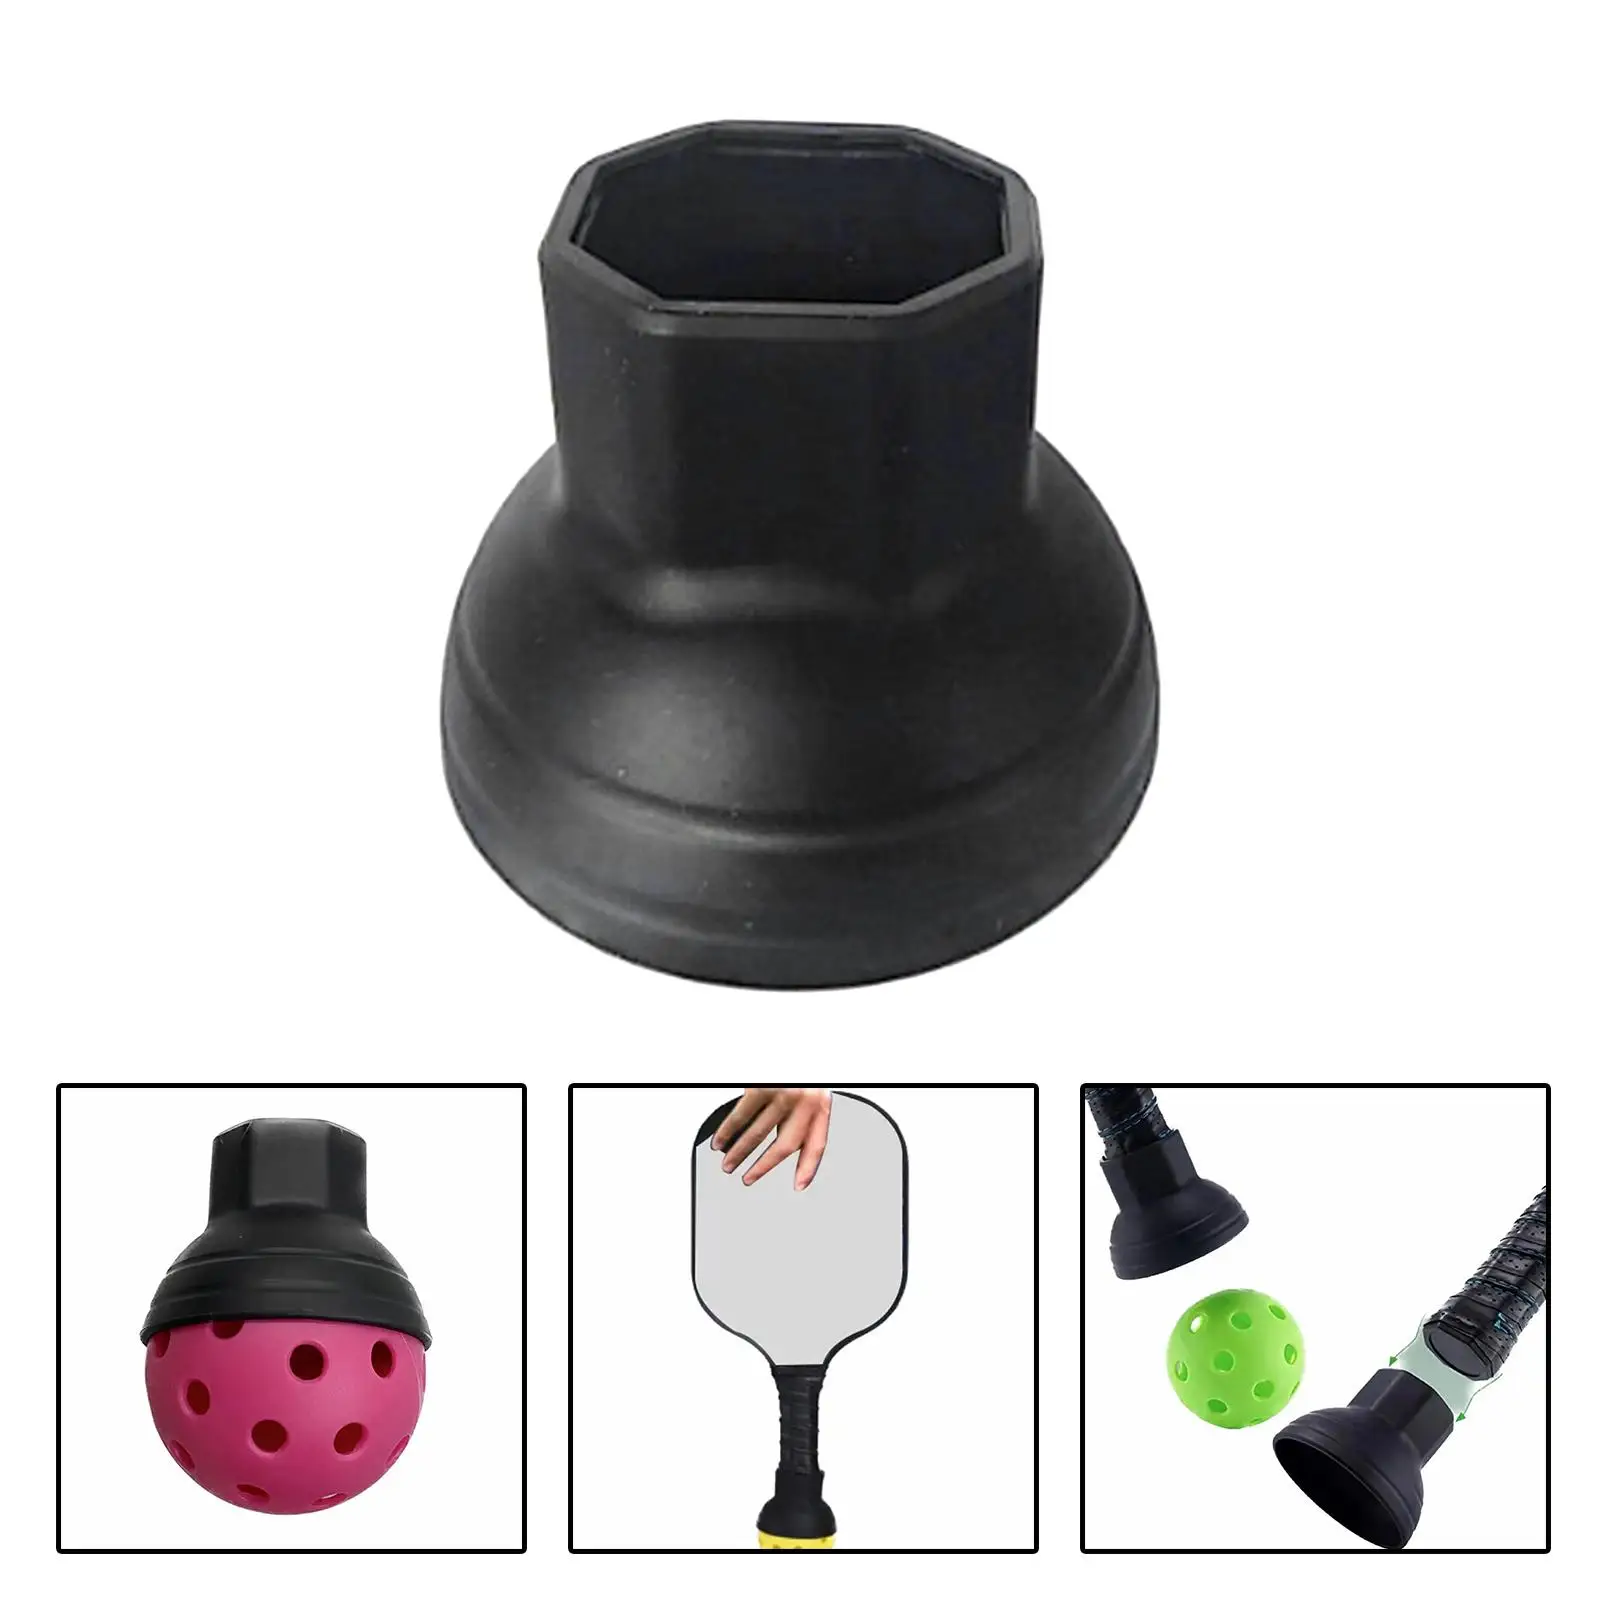 2x Pickleball Picker for Pickleball Paddles Portable without Bending over Professional Ball Pickup Tool for Putter Training